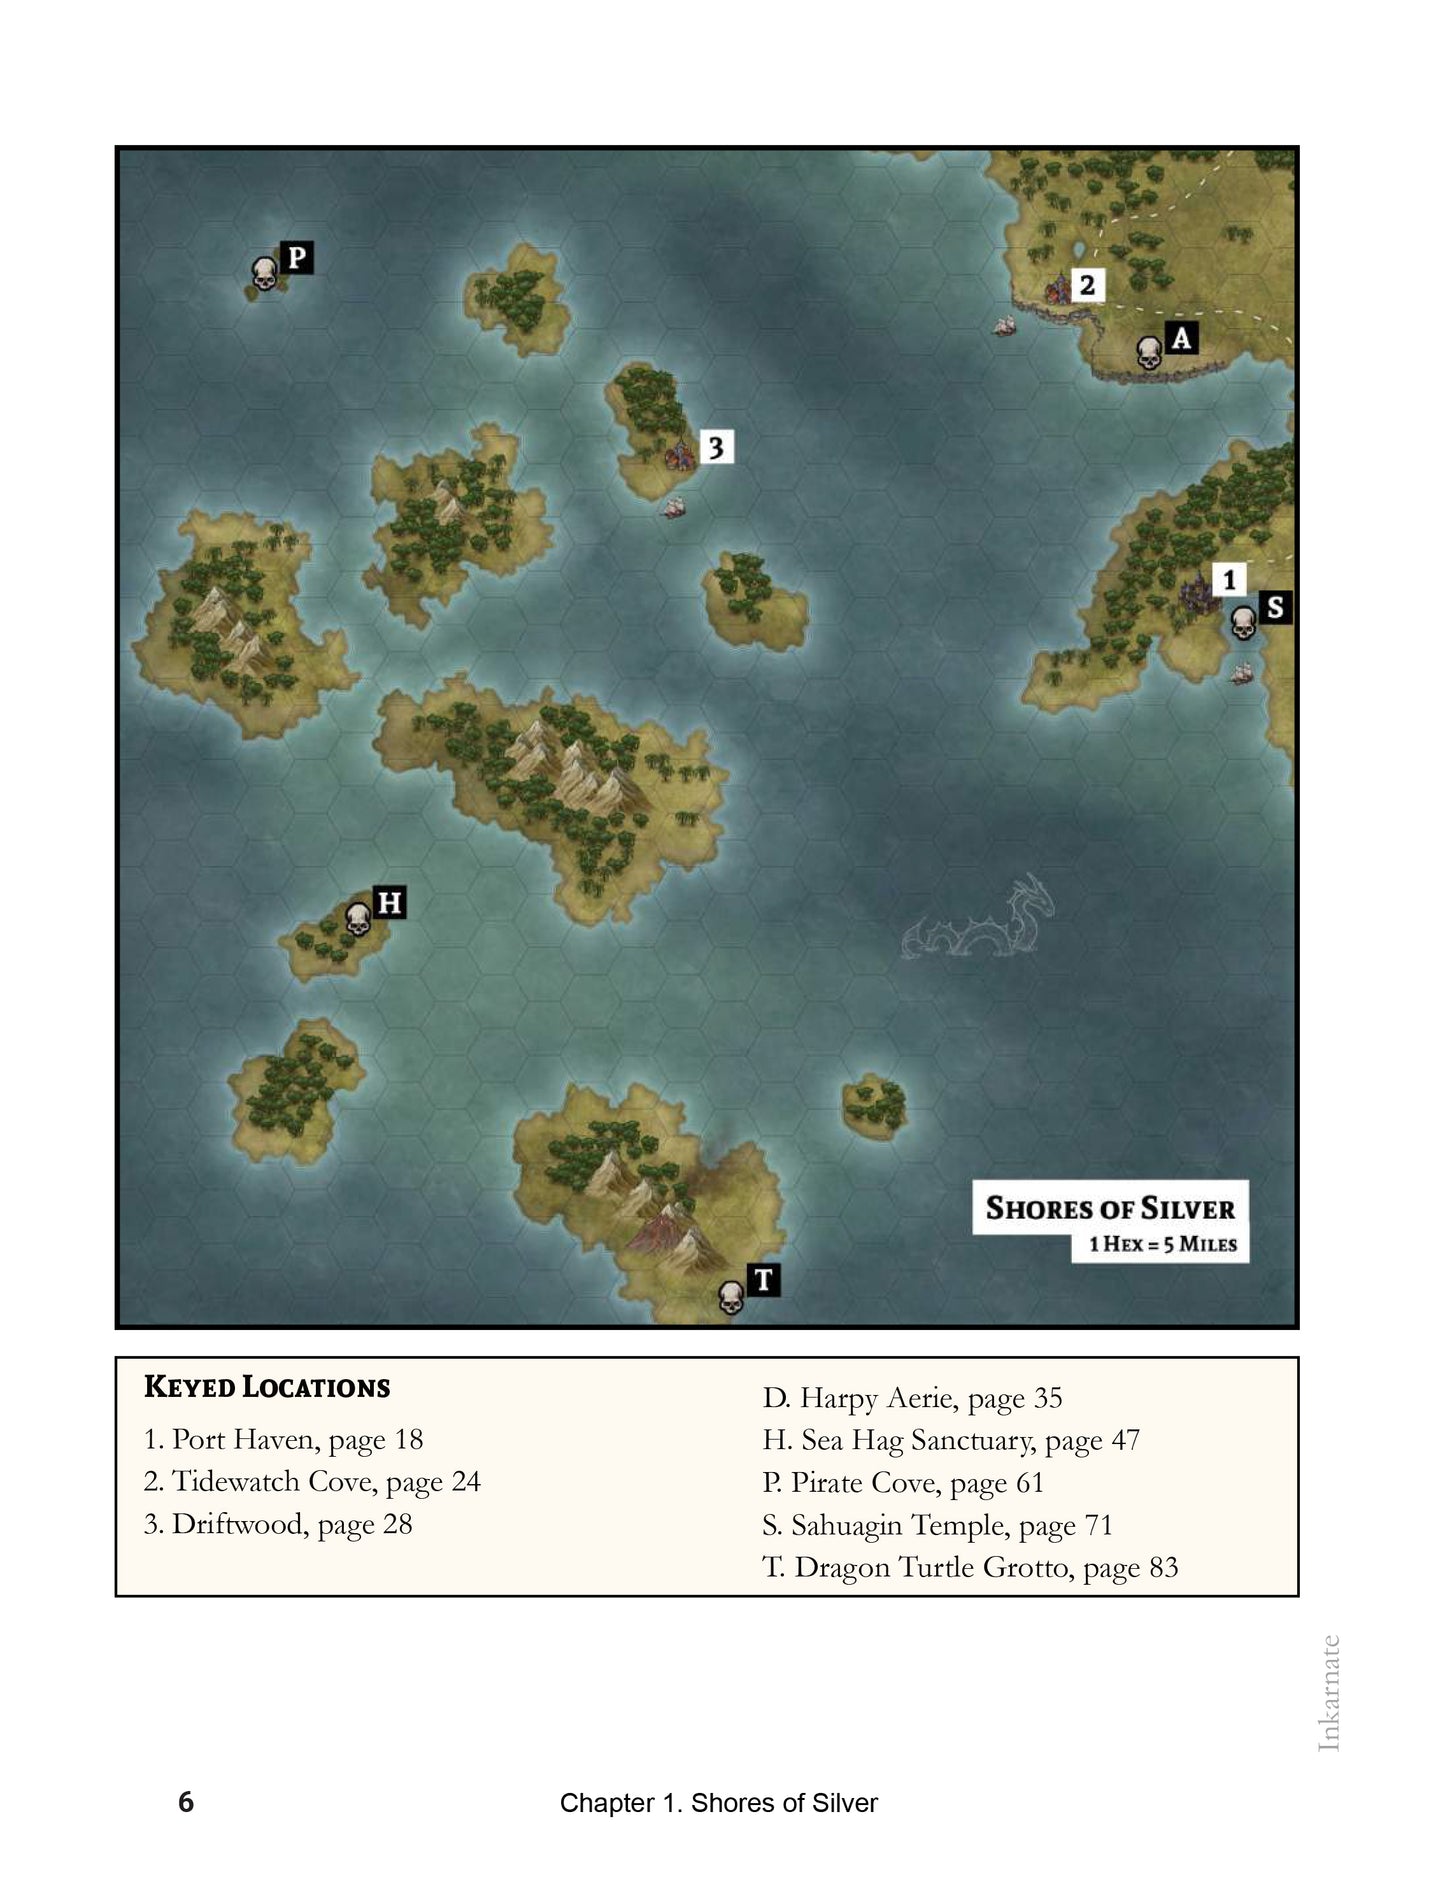 Dungeons & Lairs 2: Shores of Silver Softcover